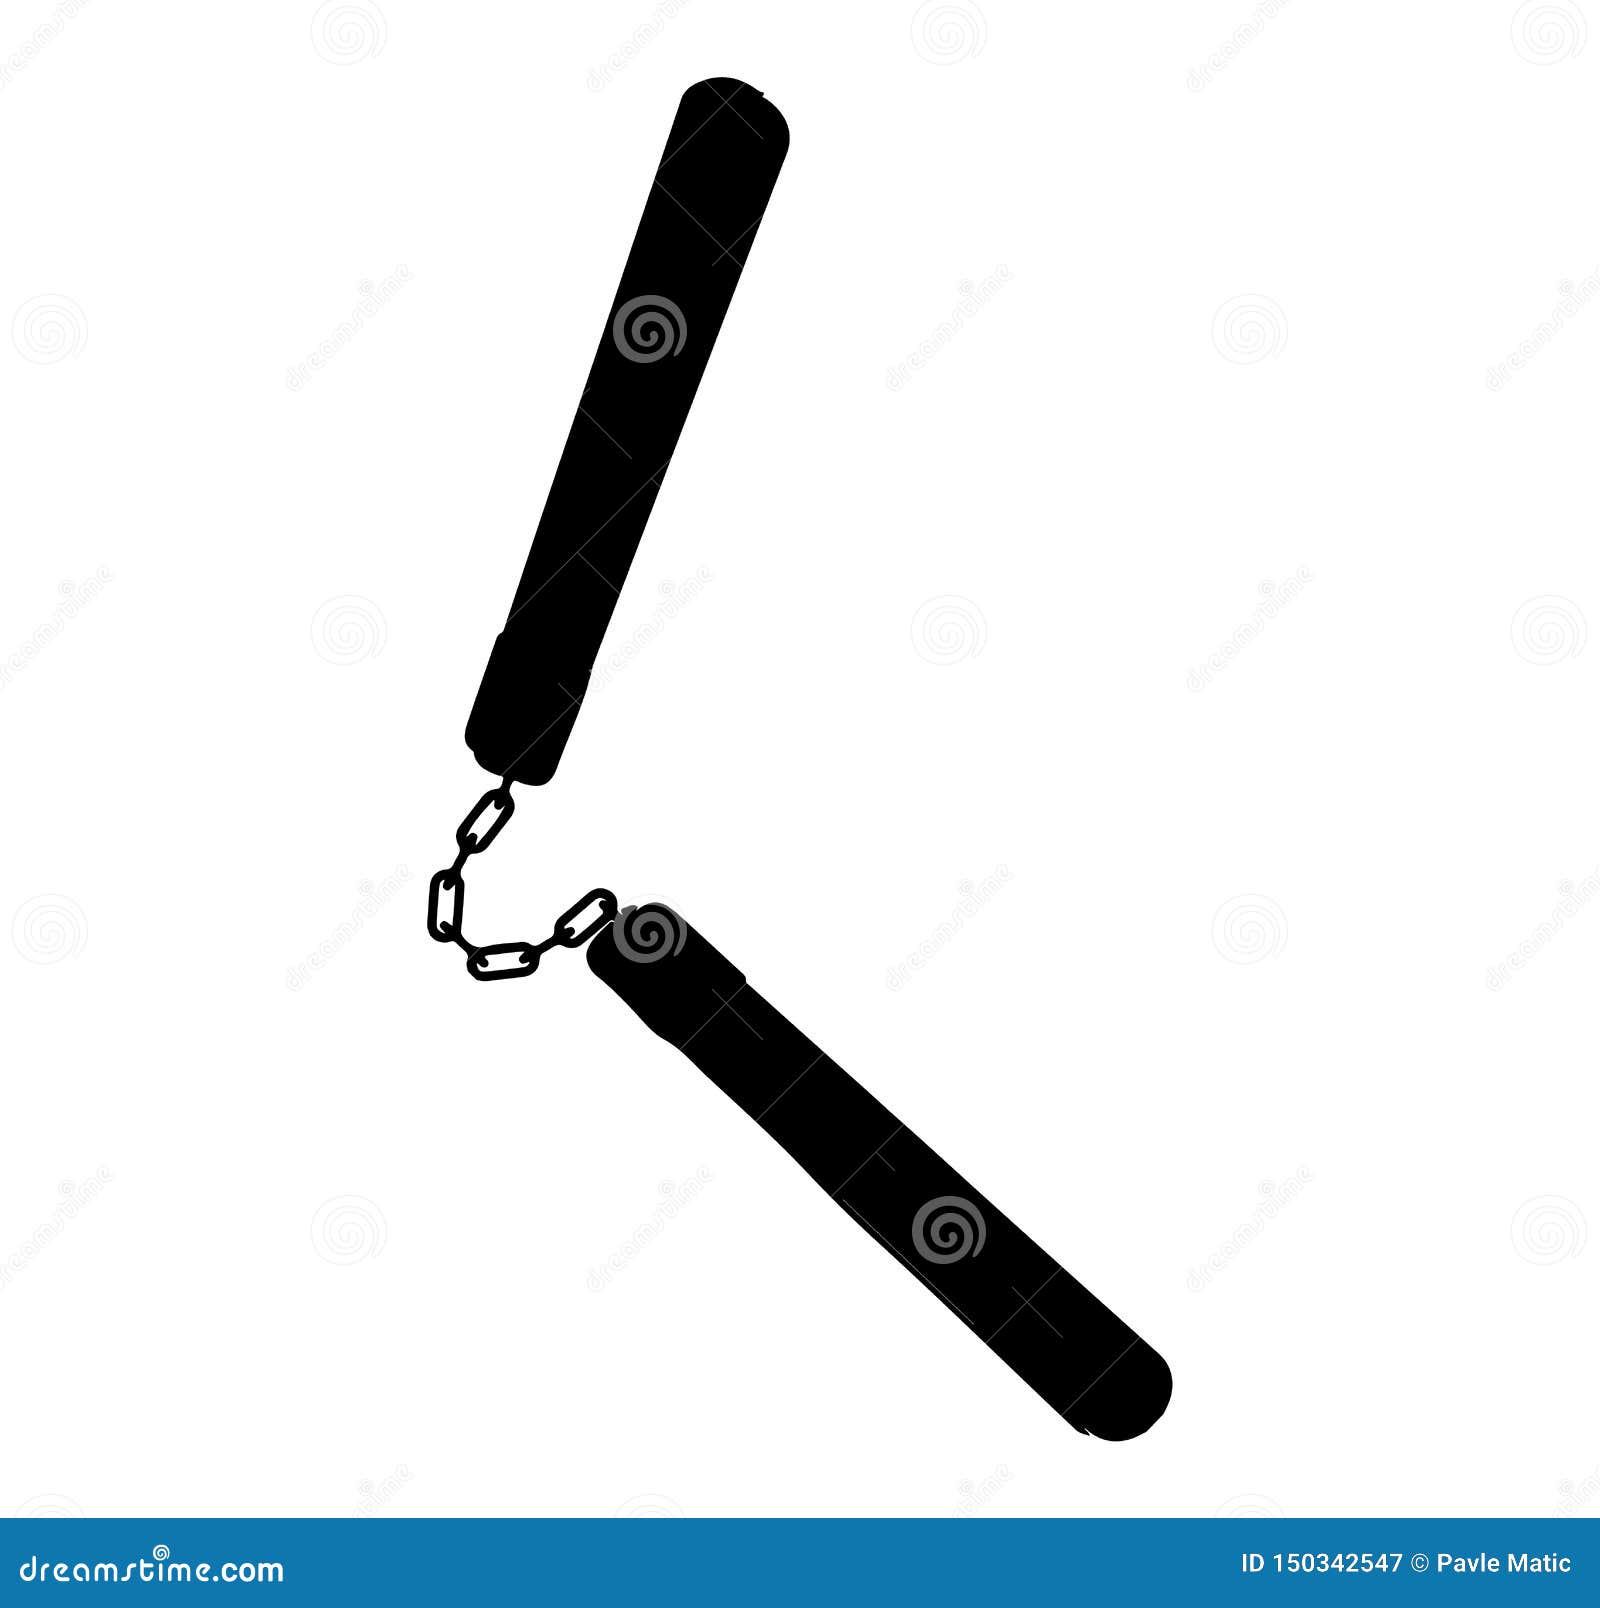 Black flat simple silhouette sign symbol icon of nunchaku isolated on white...